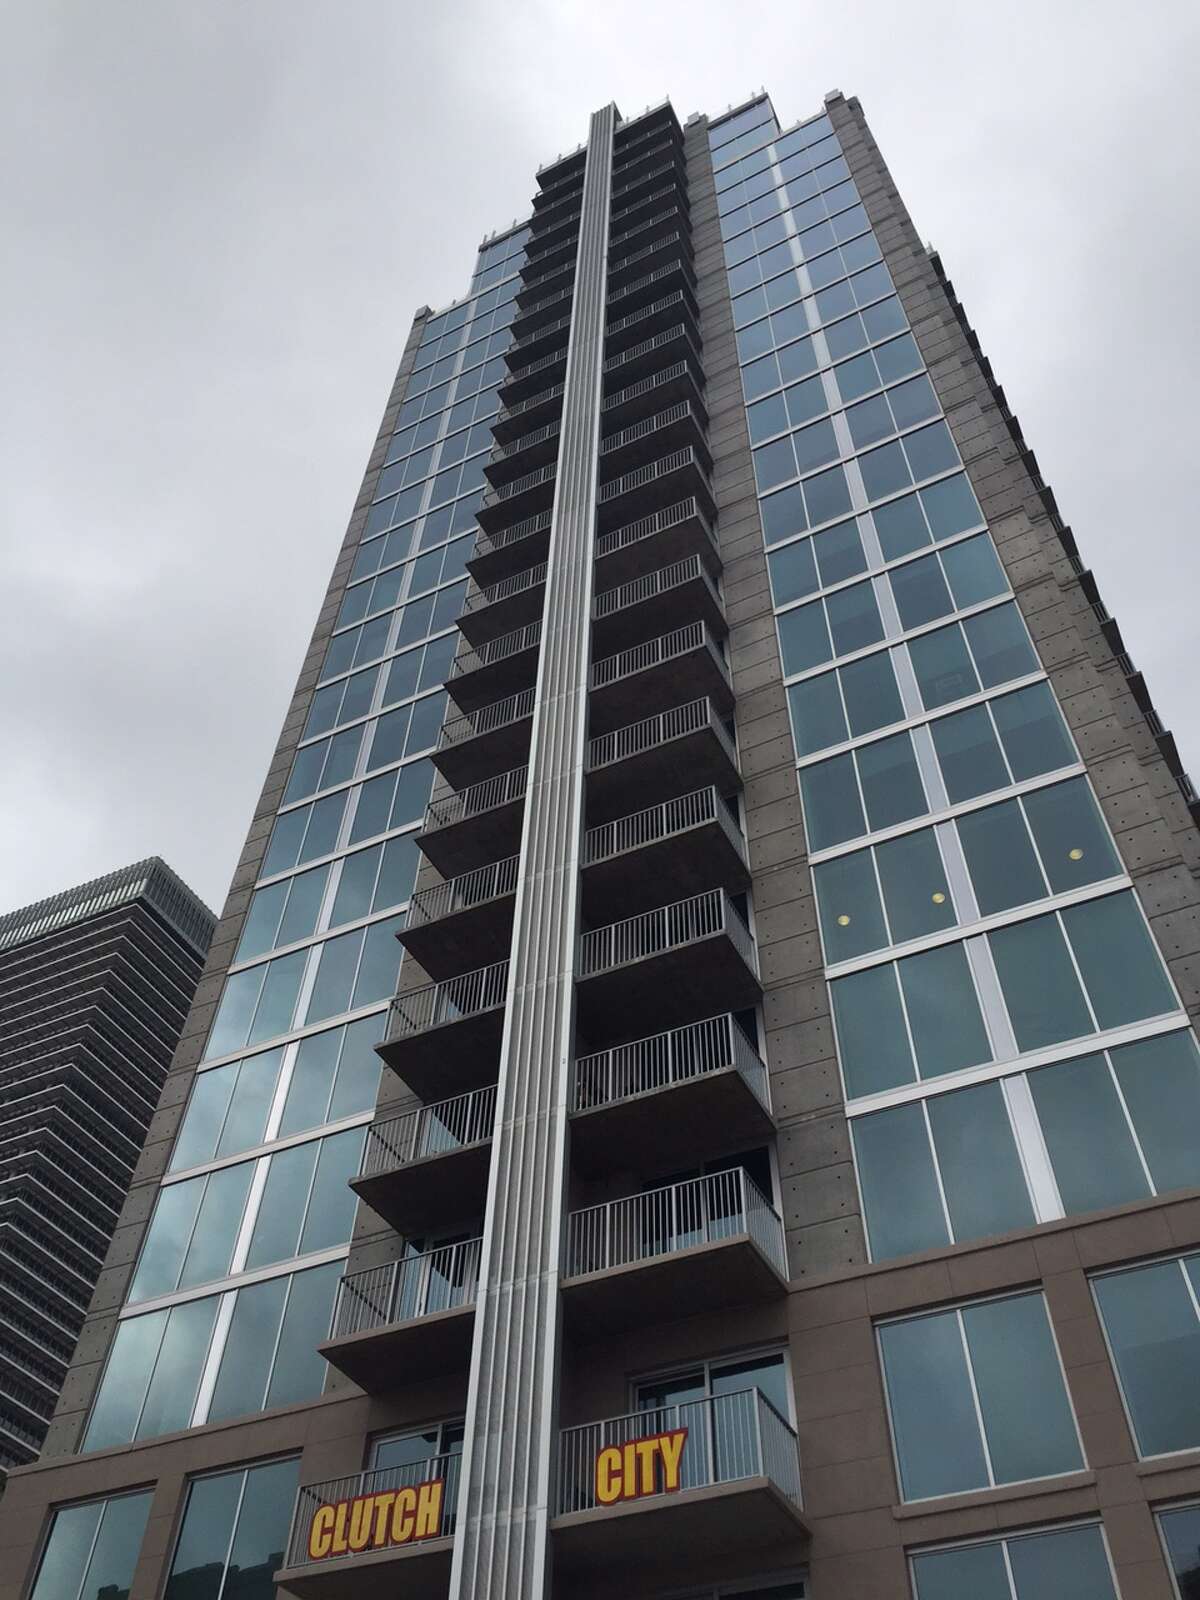 The tour ended at Skyhouse, a new residential tower with all the fixings. An identical tower is being built across from it.